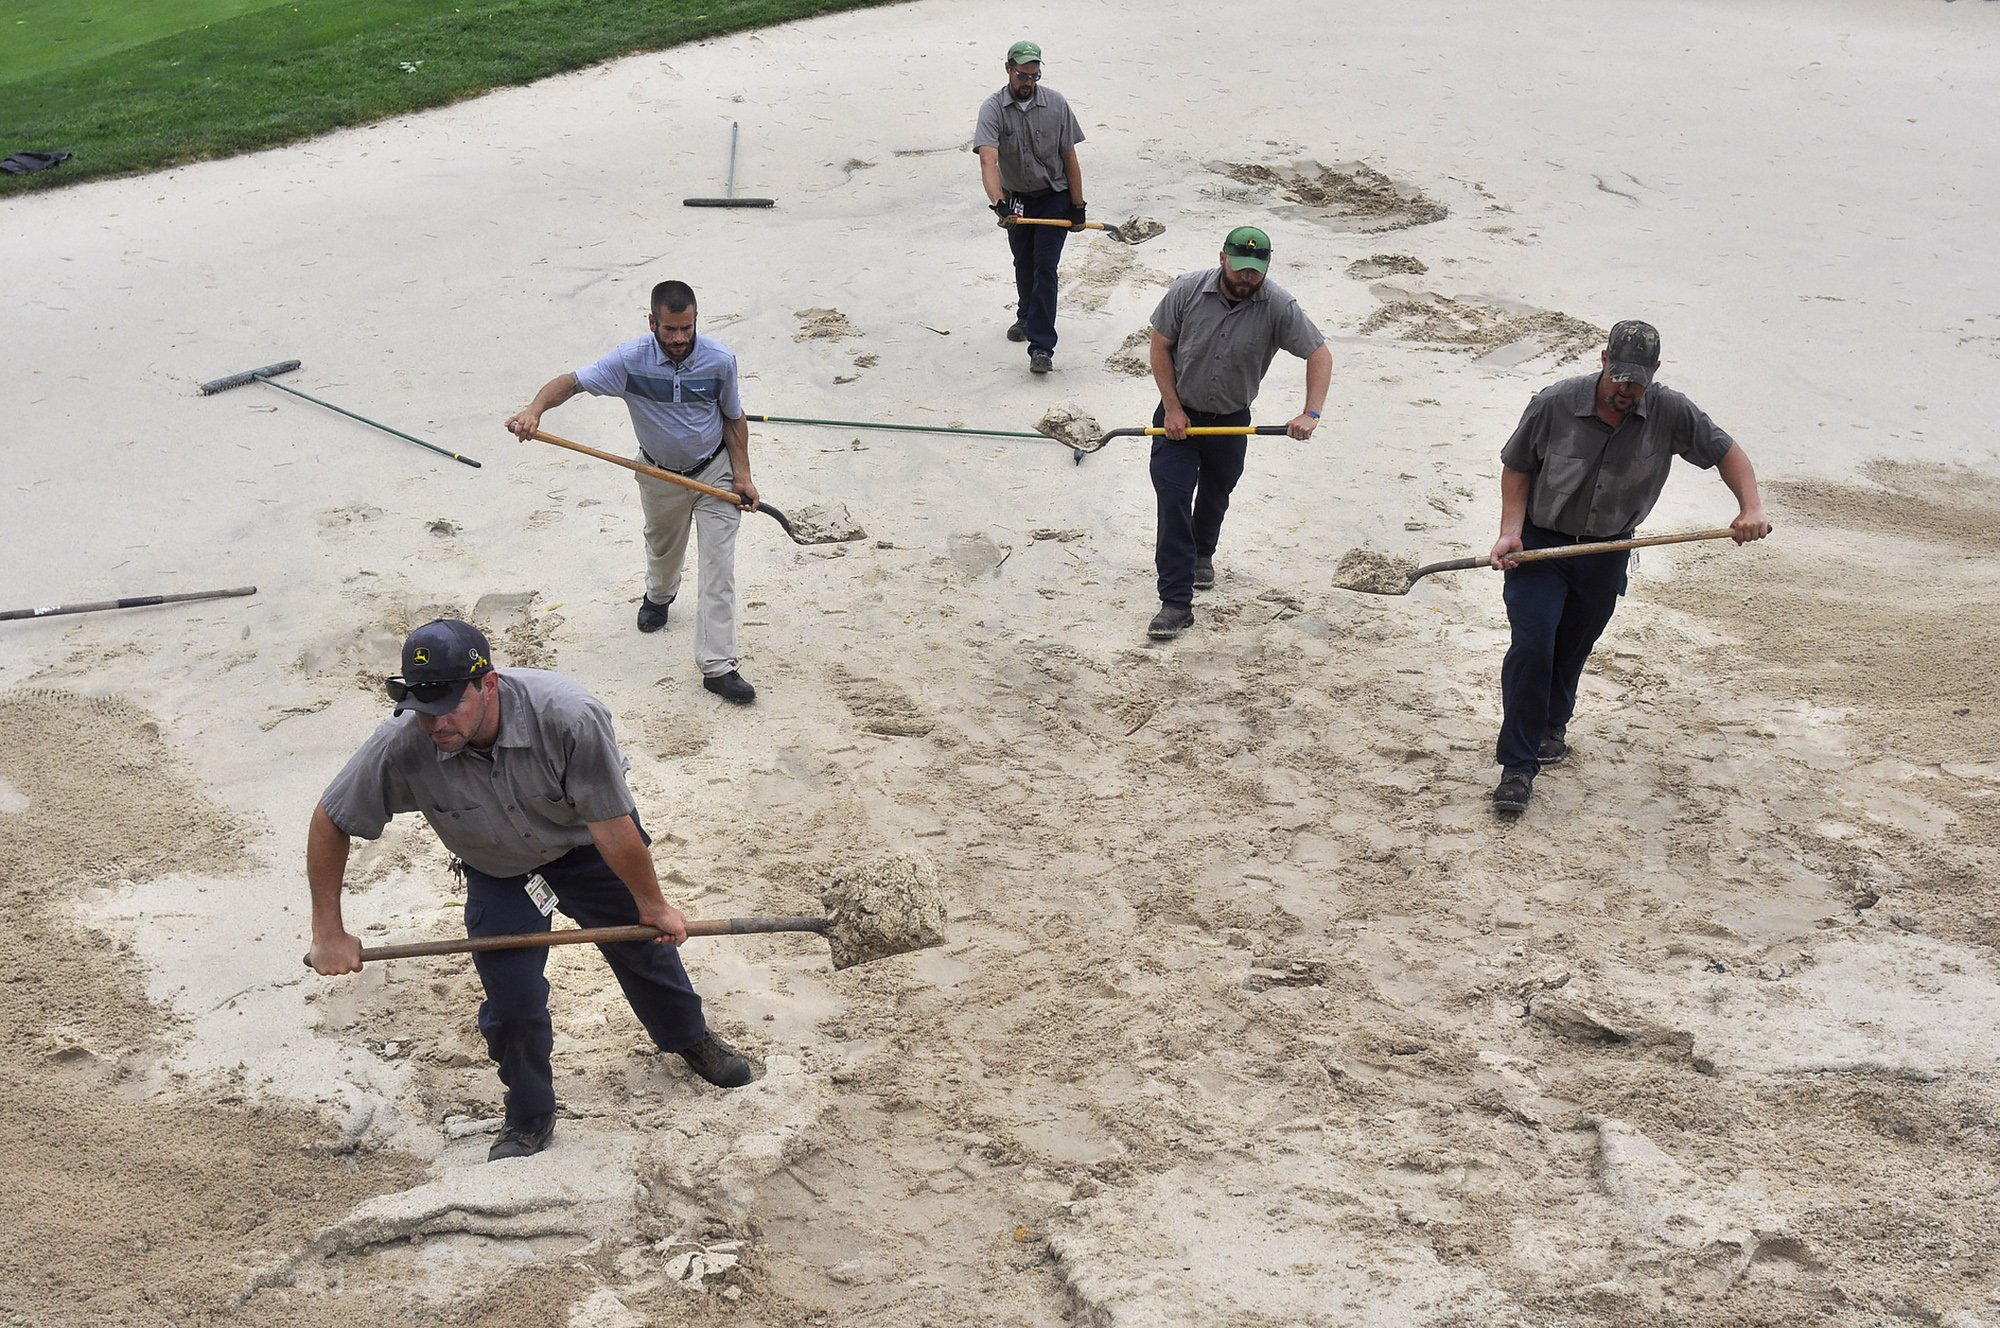  Grounds crew members work to clean up a sand trap on the 2nd hole of TPC Deere Run during a delay in play of the John Deere Classic on the morning of Friday, Aug. 12, 2016, in Silivs. Play is currently schedule to resume at noon. 